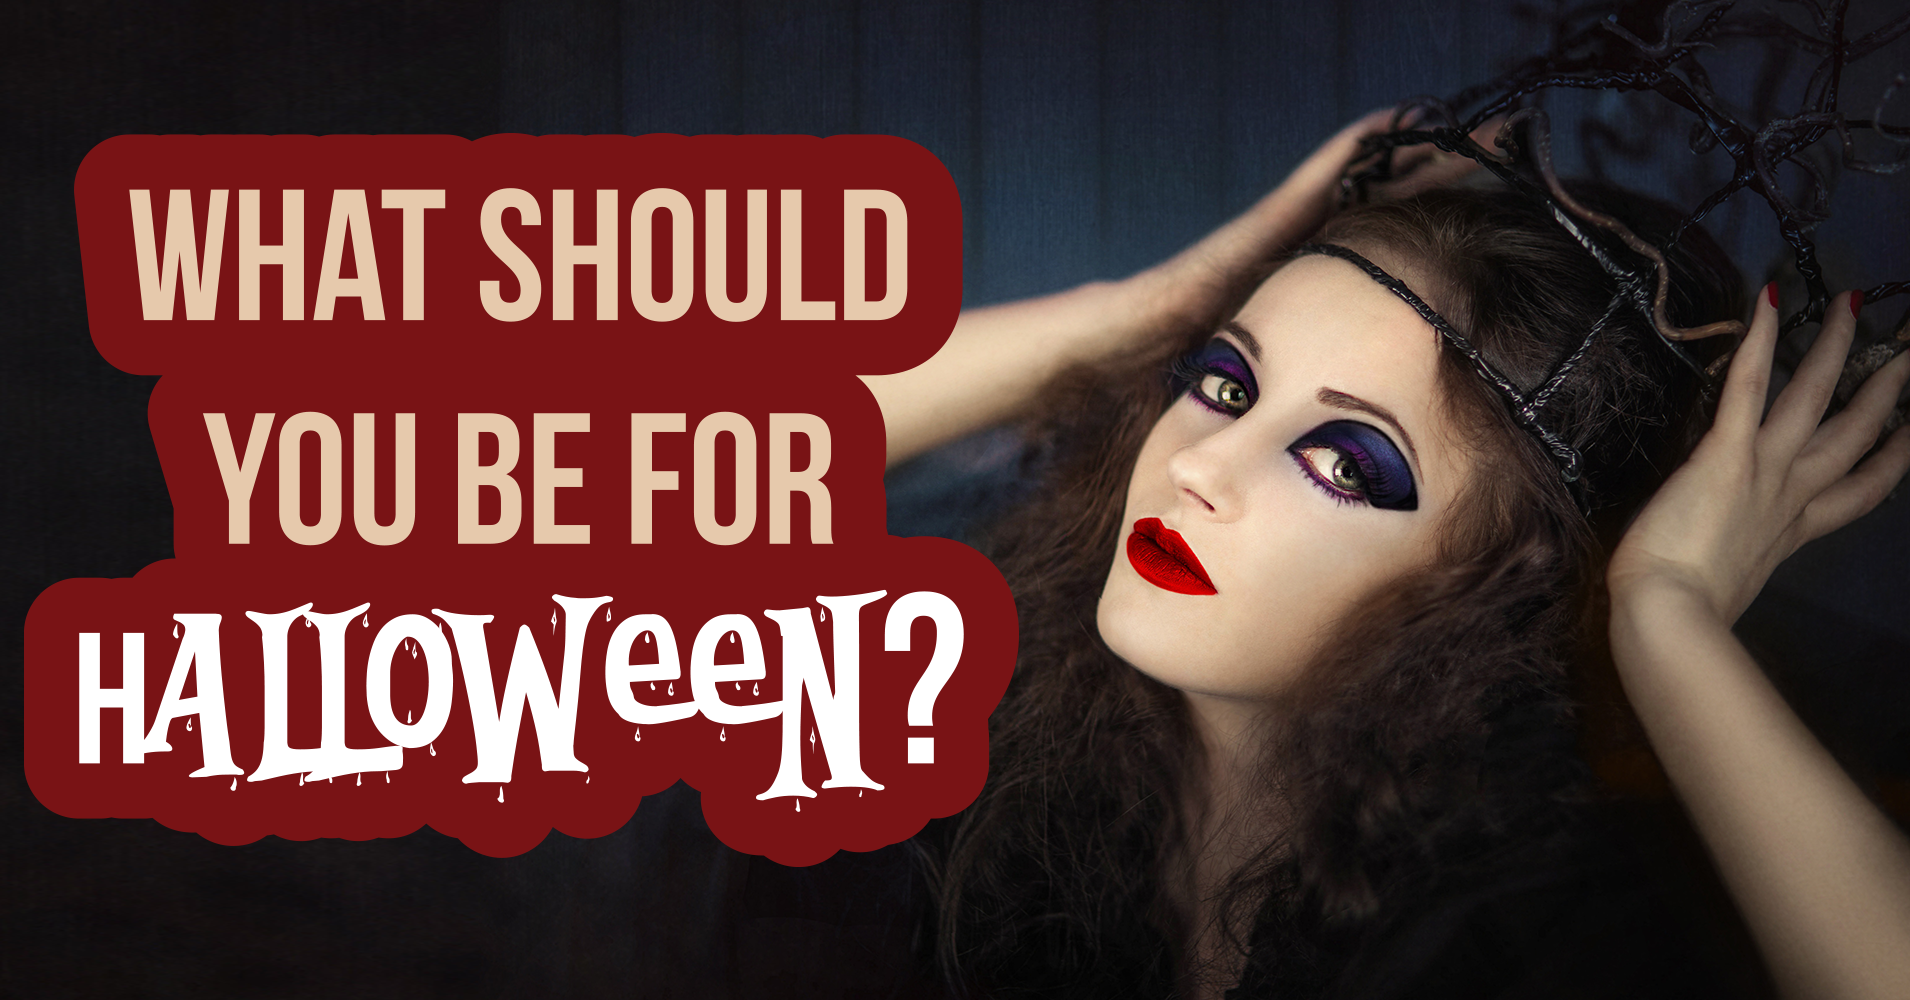 ★ How old should you be to watch halloween